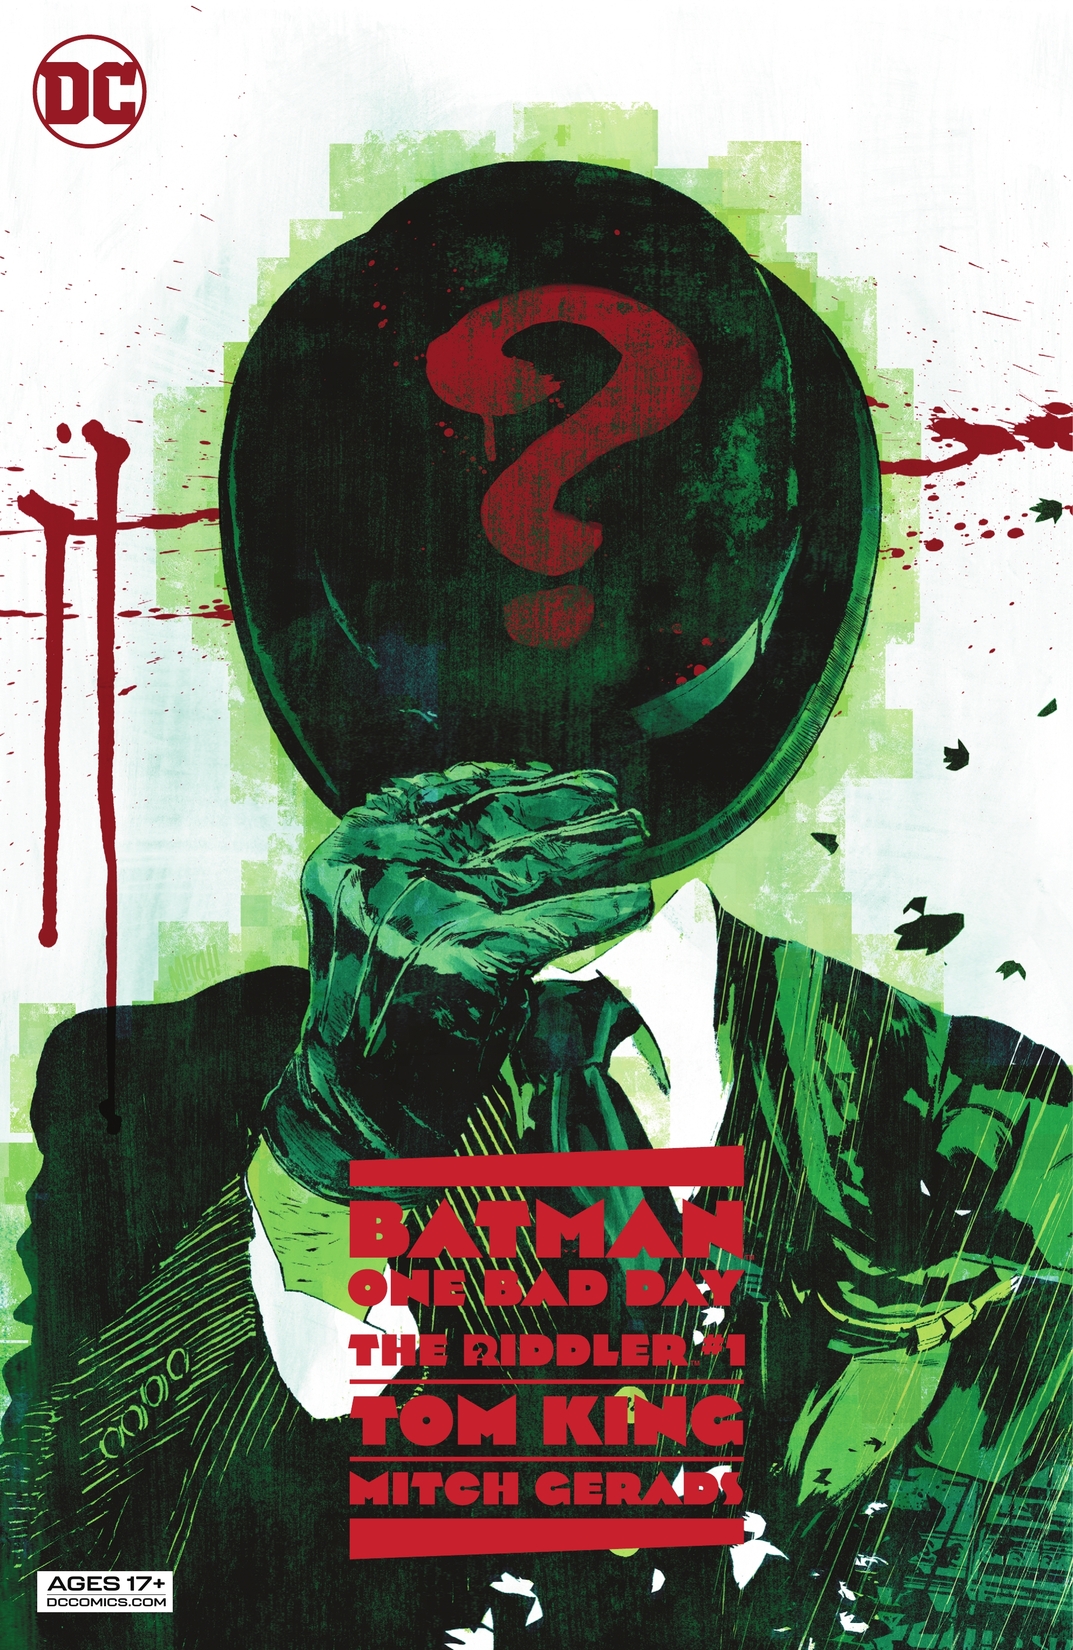 Batman - One Bad Day: The Riddler #1 preview images